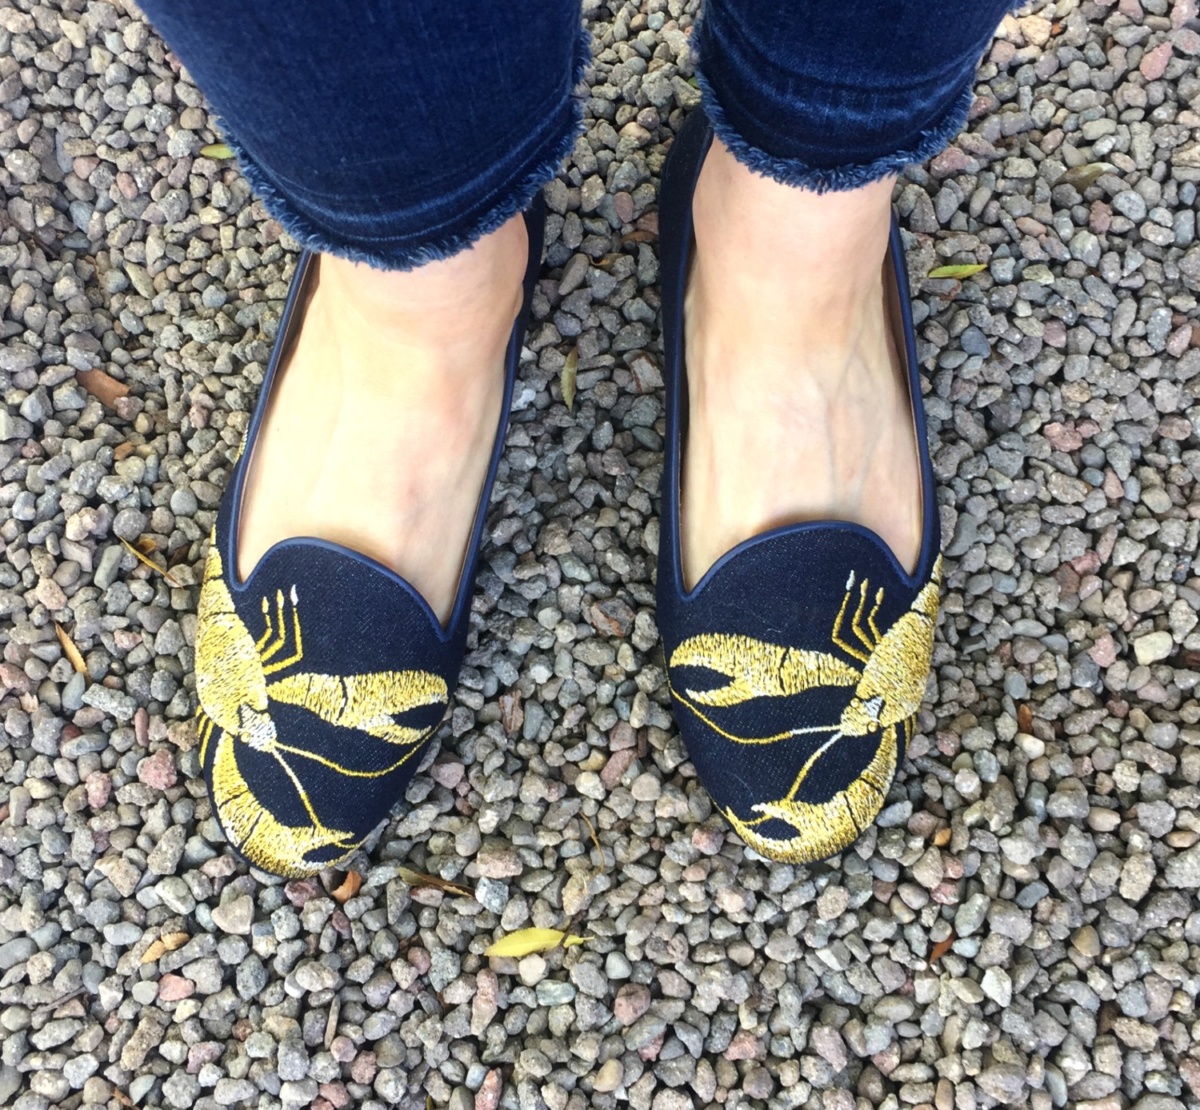 Shoe shopping in Paris: lobster embroidered flats from Chatelles. Details at une femme d'un certain age.